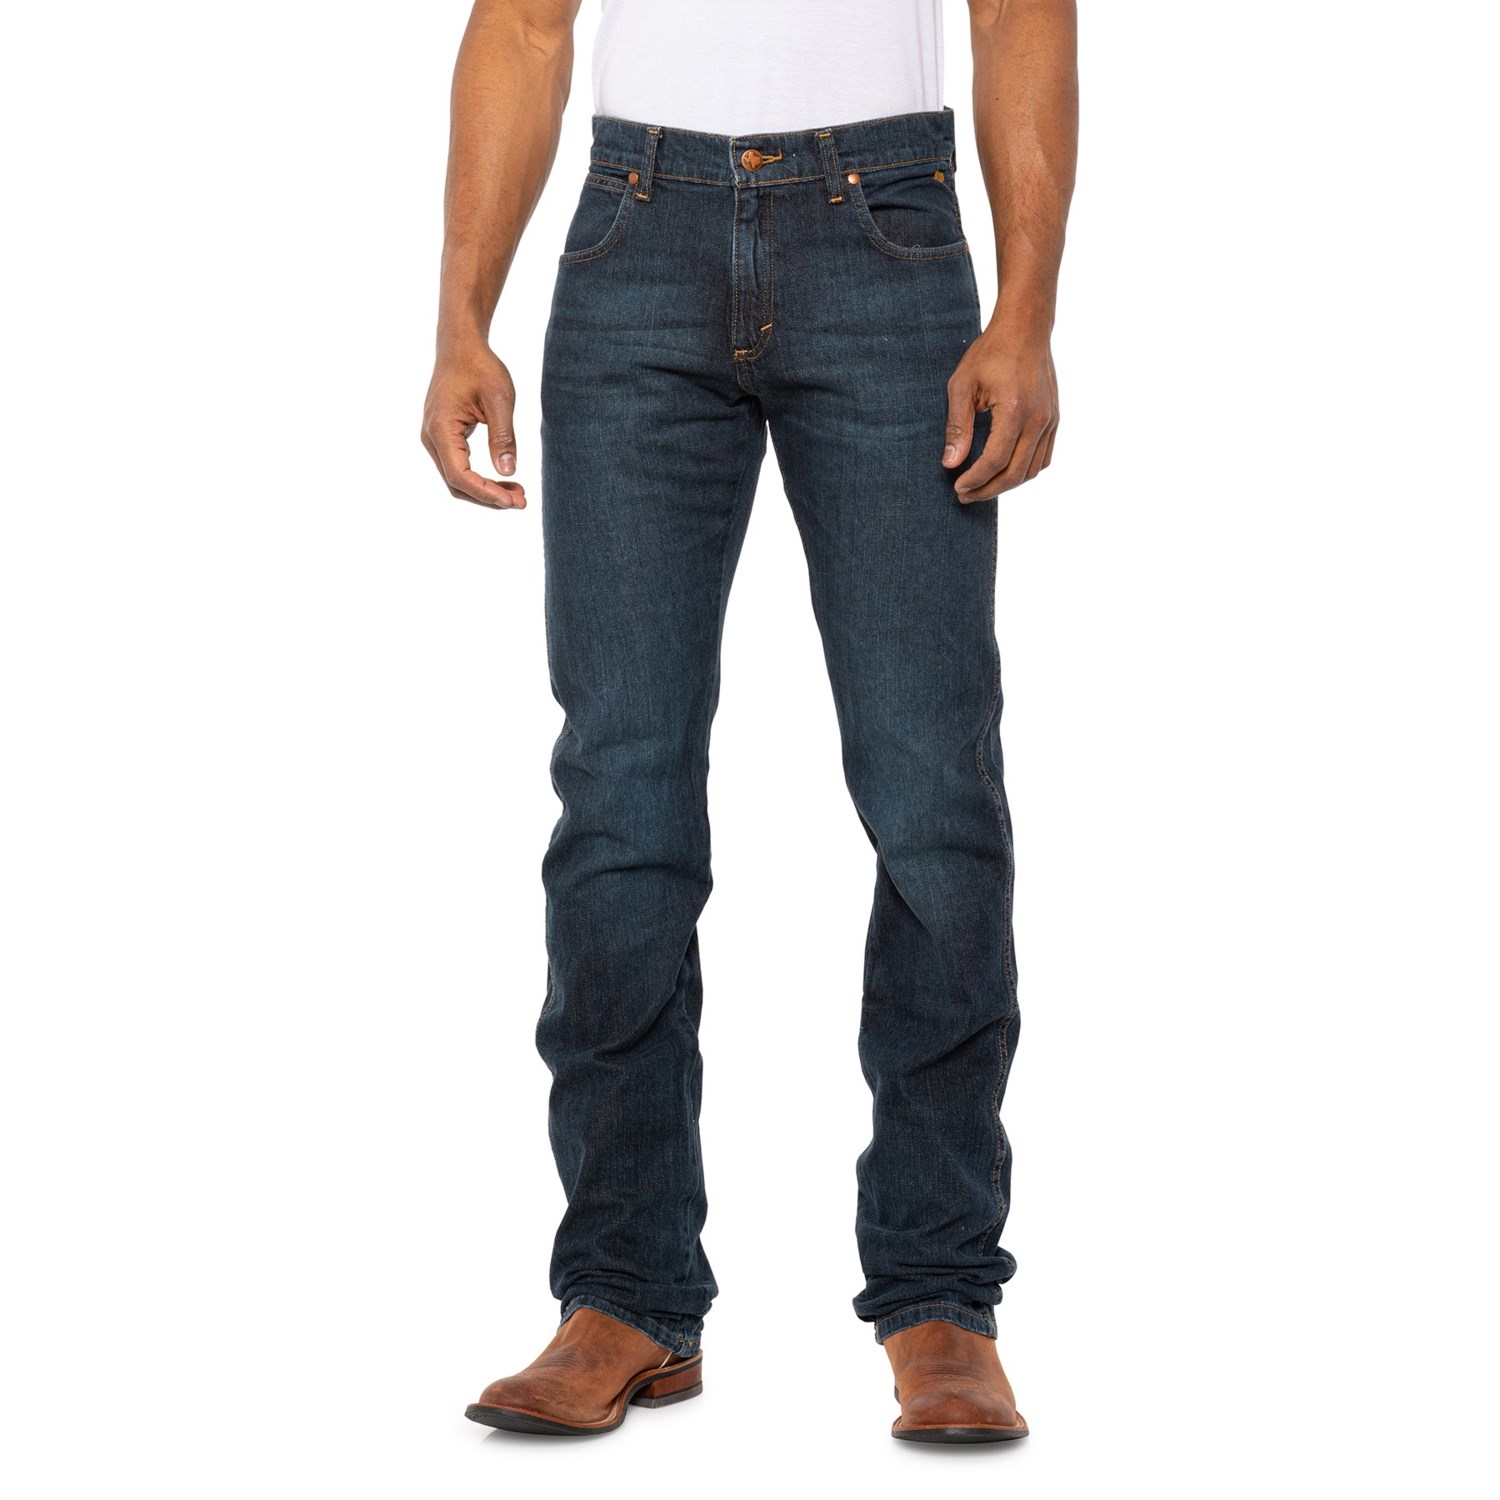 Wrangler Rooted Collection Slim Fit Jeans (For Big and Tall Men) - Save 77%